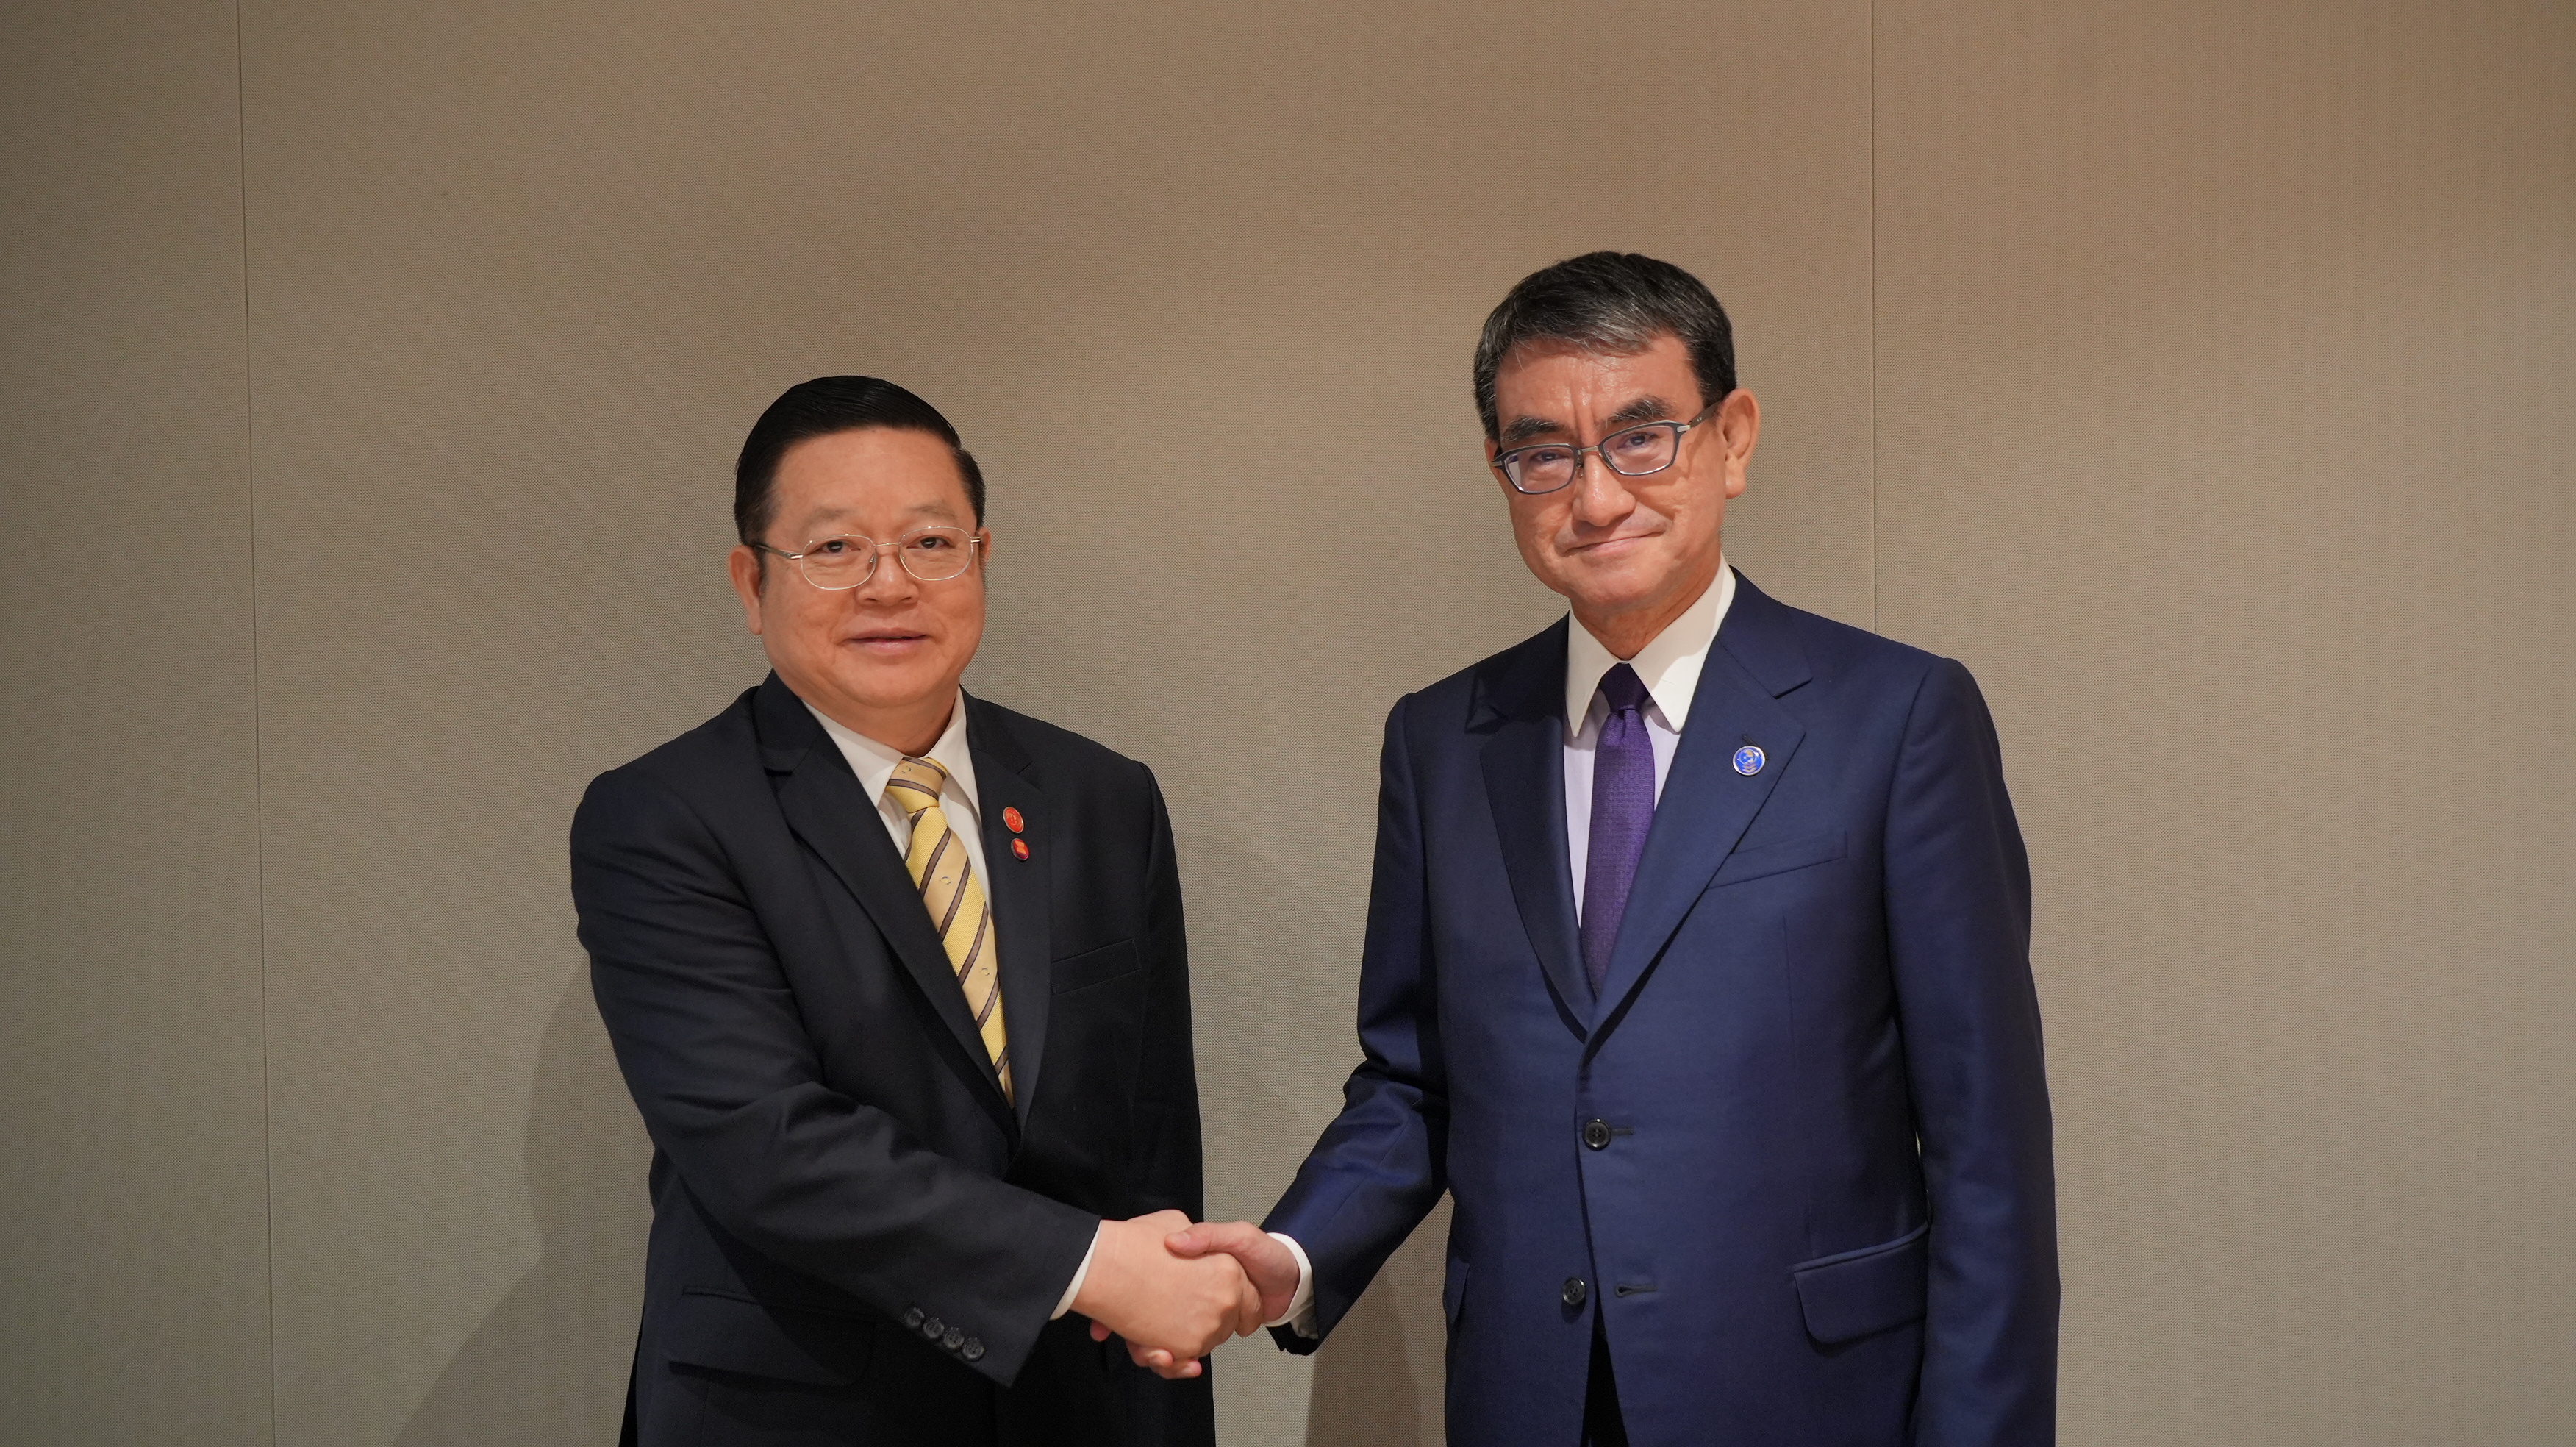 Meeting with Dr. Kao Kim Hourn, Secretary-General of ASEAN